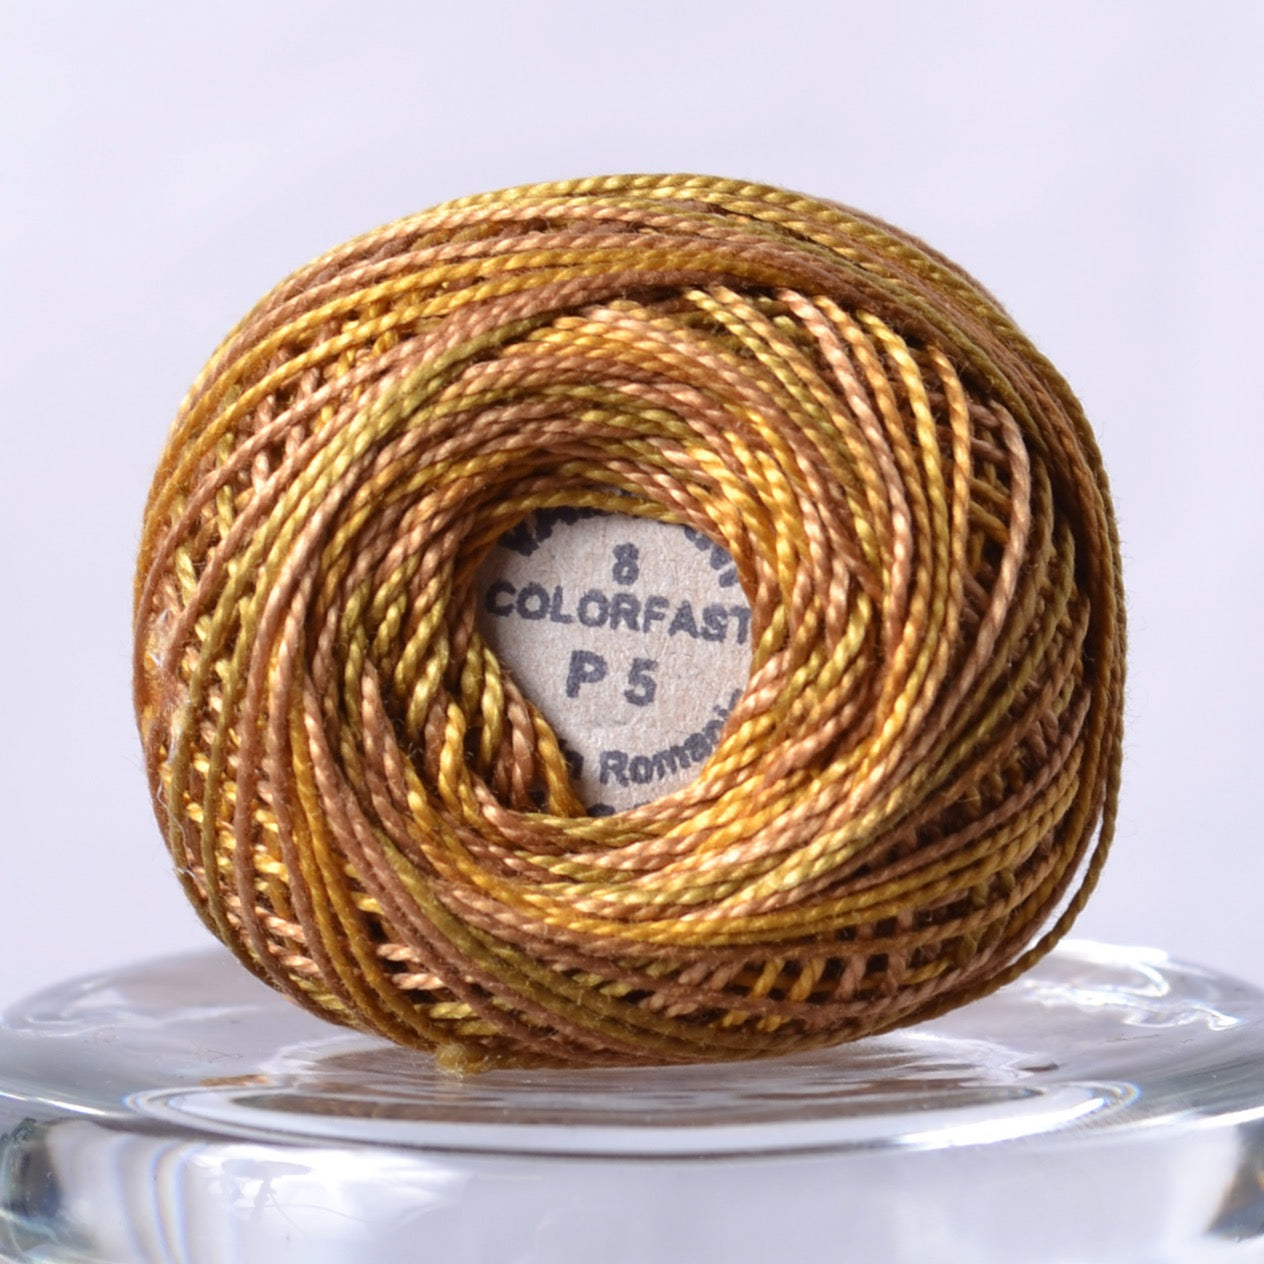 Cotton thread, Tarnished Gold, P5, size 8